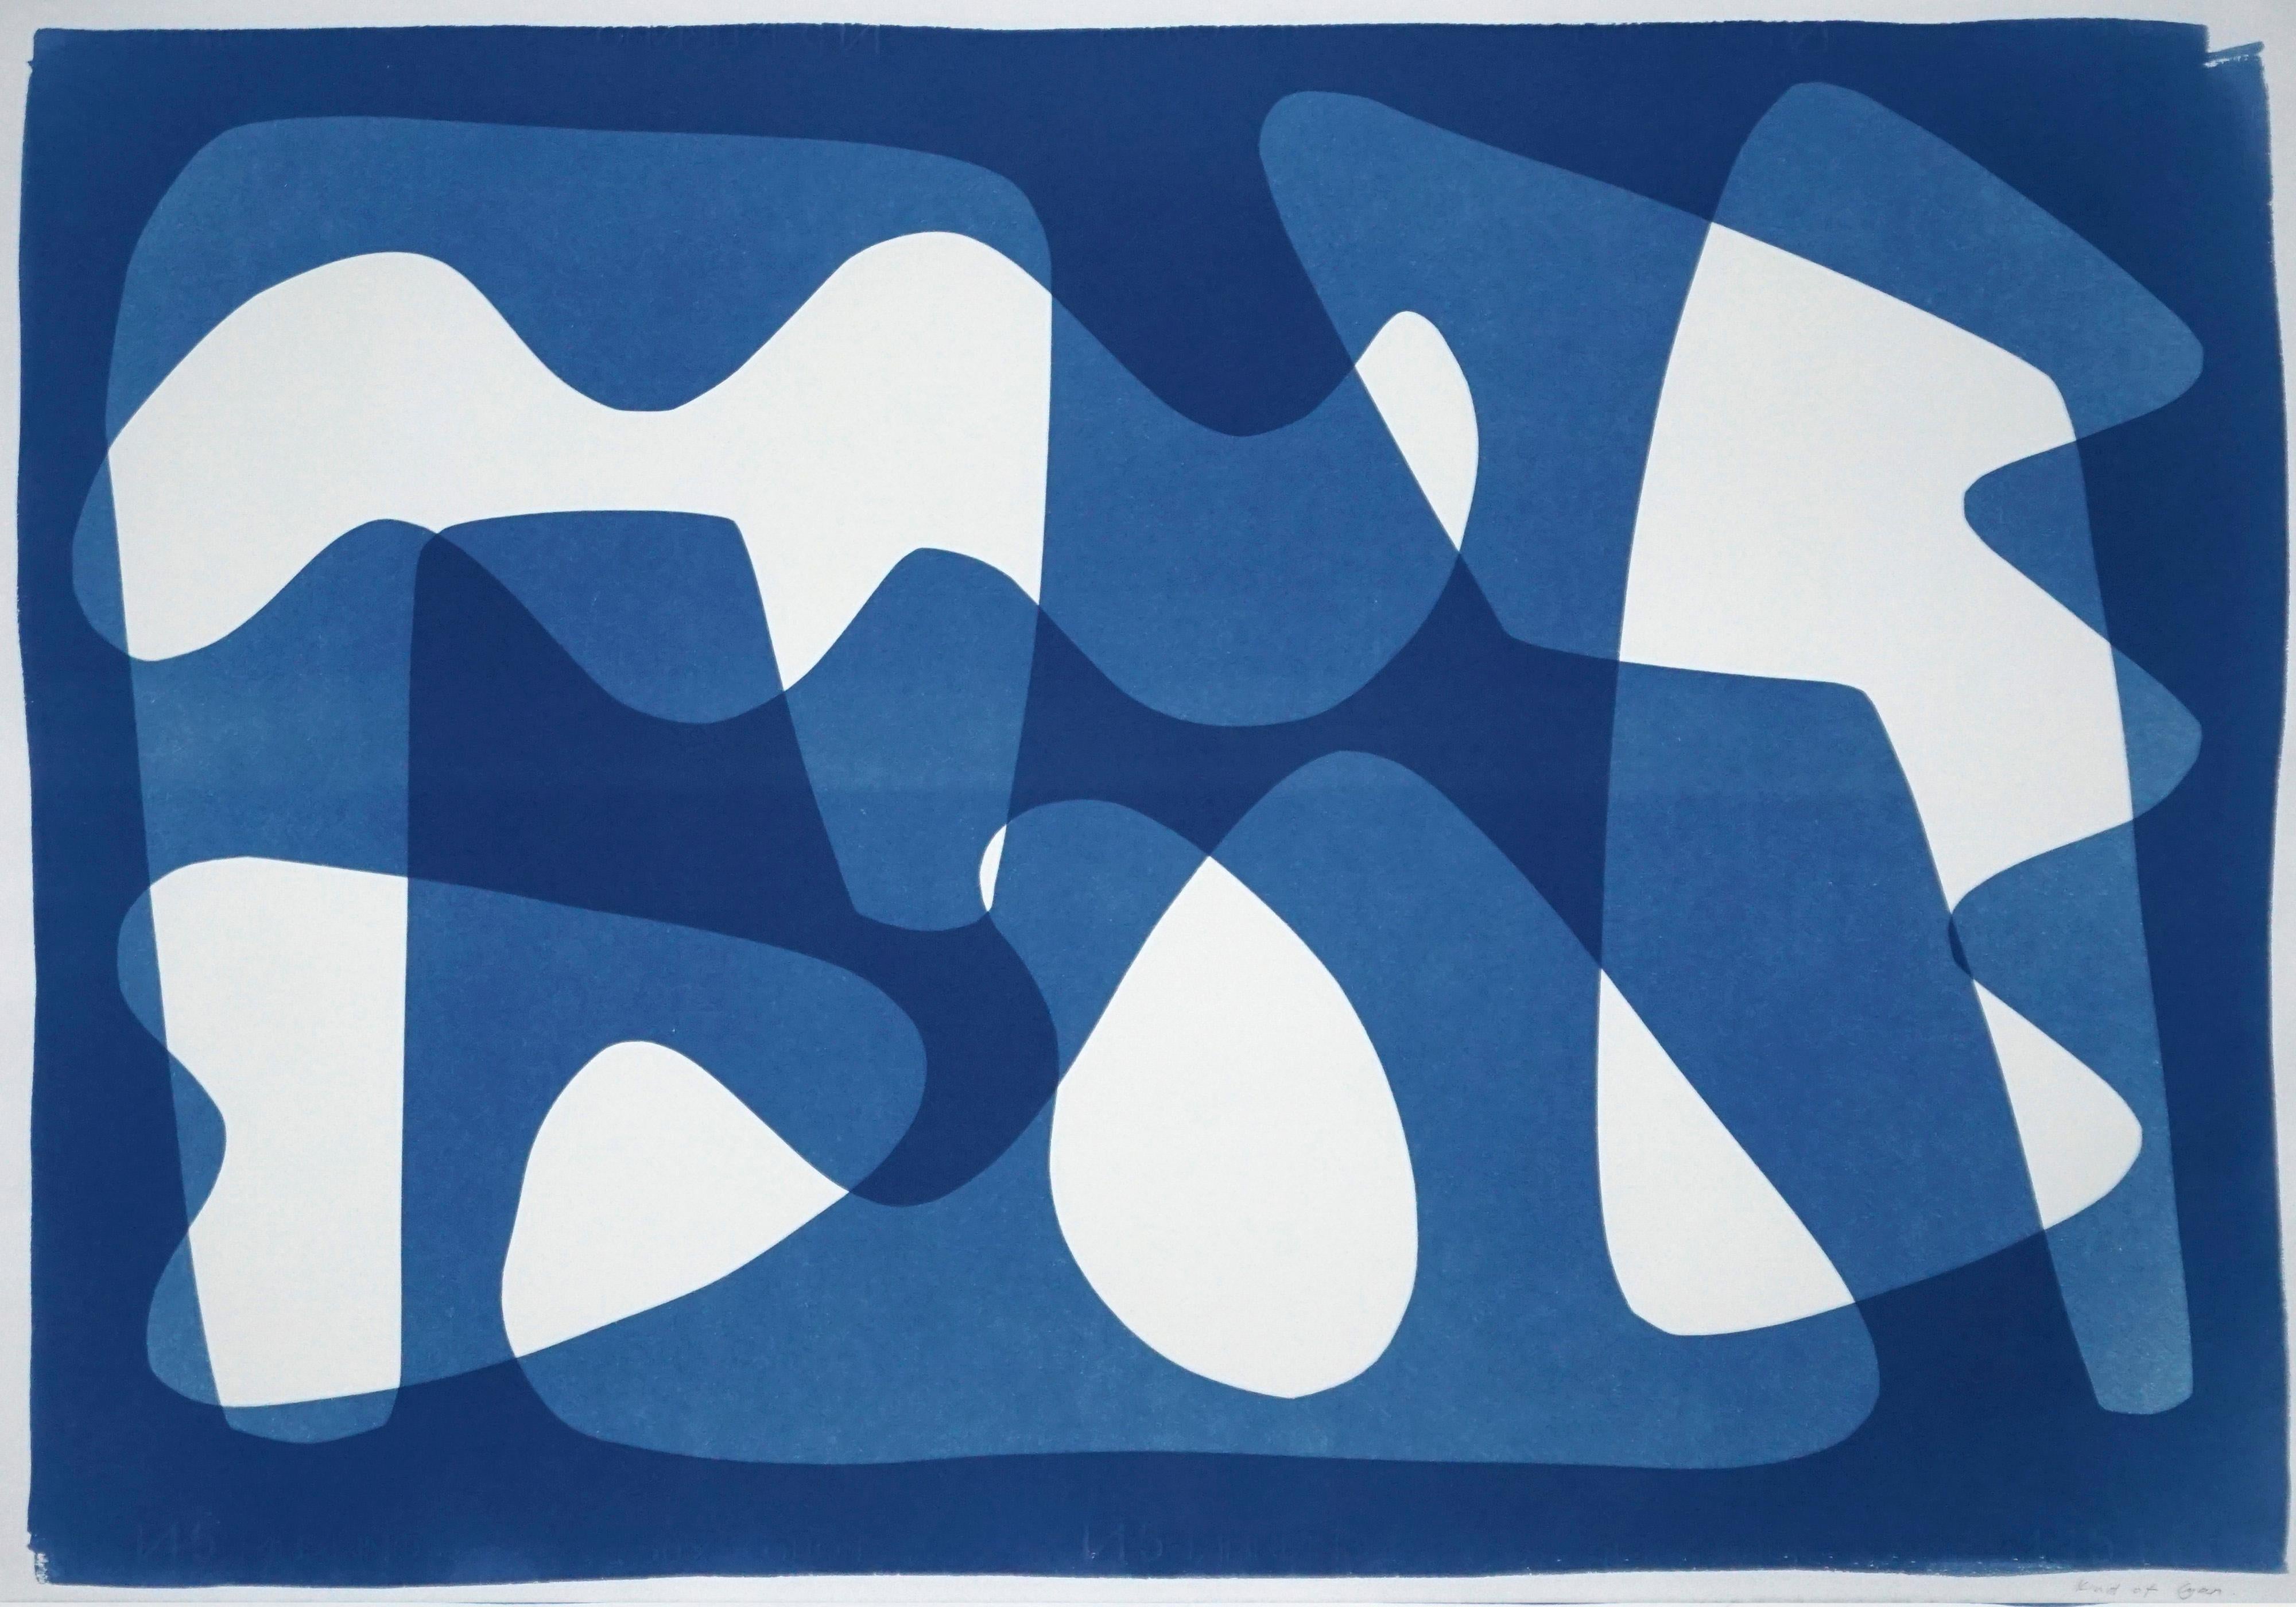 Kind of Cyan Abstract Print - Modern Mid-Century Cutout Shapes in Blue Tones, Original Cyanotype, Abstract 